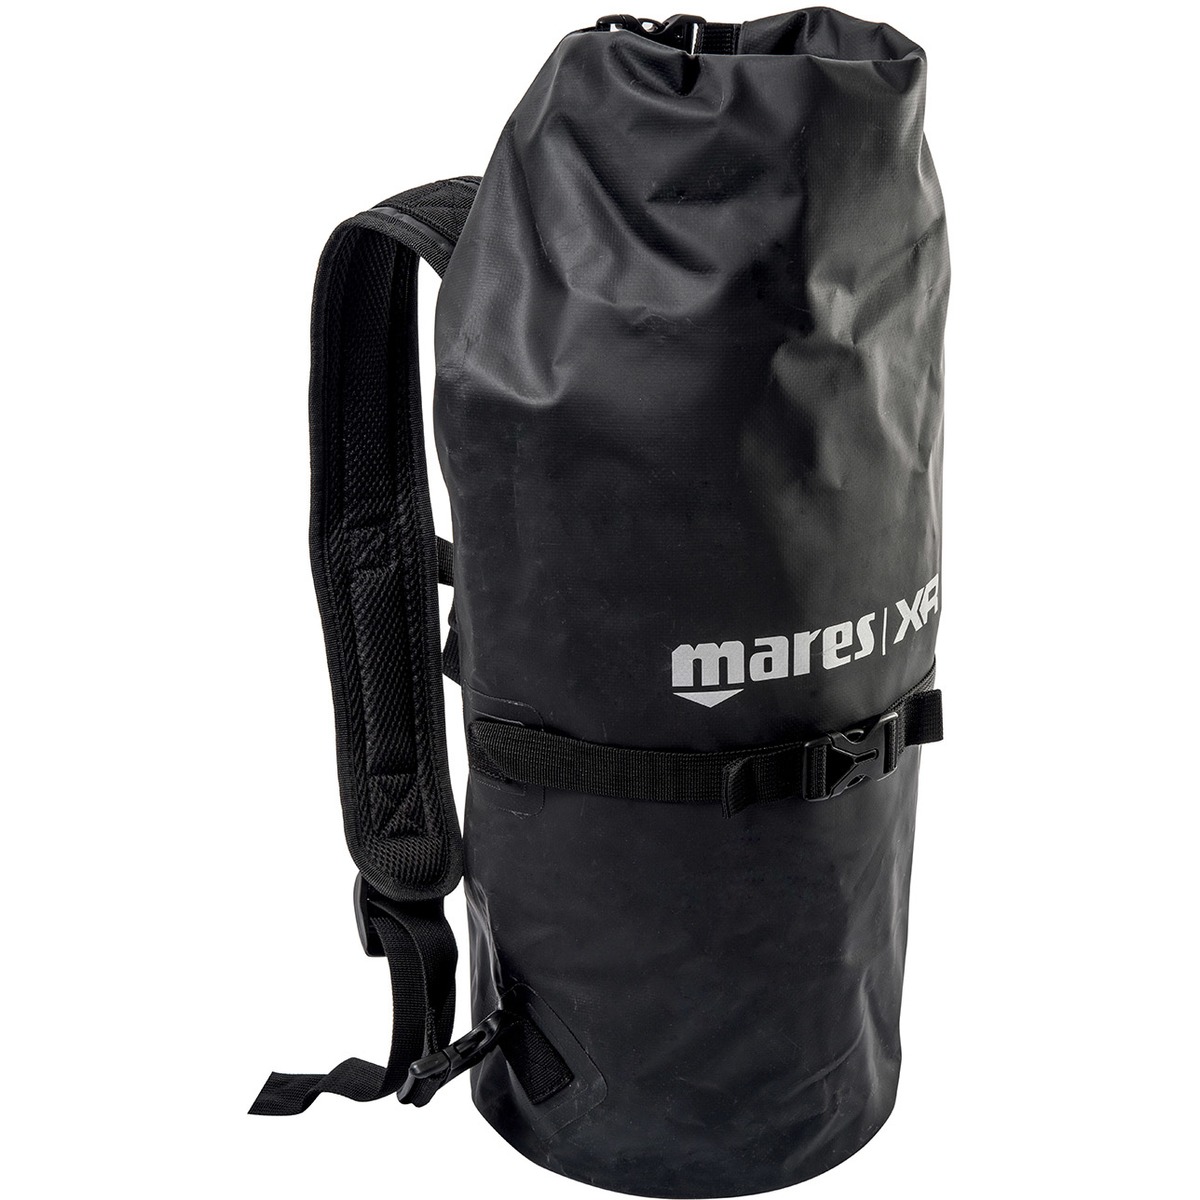 mares dry backpack | Dive HQ Auckland Shop